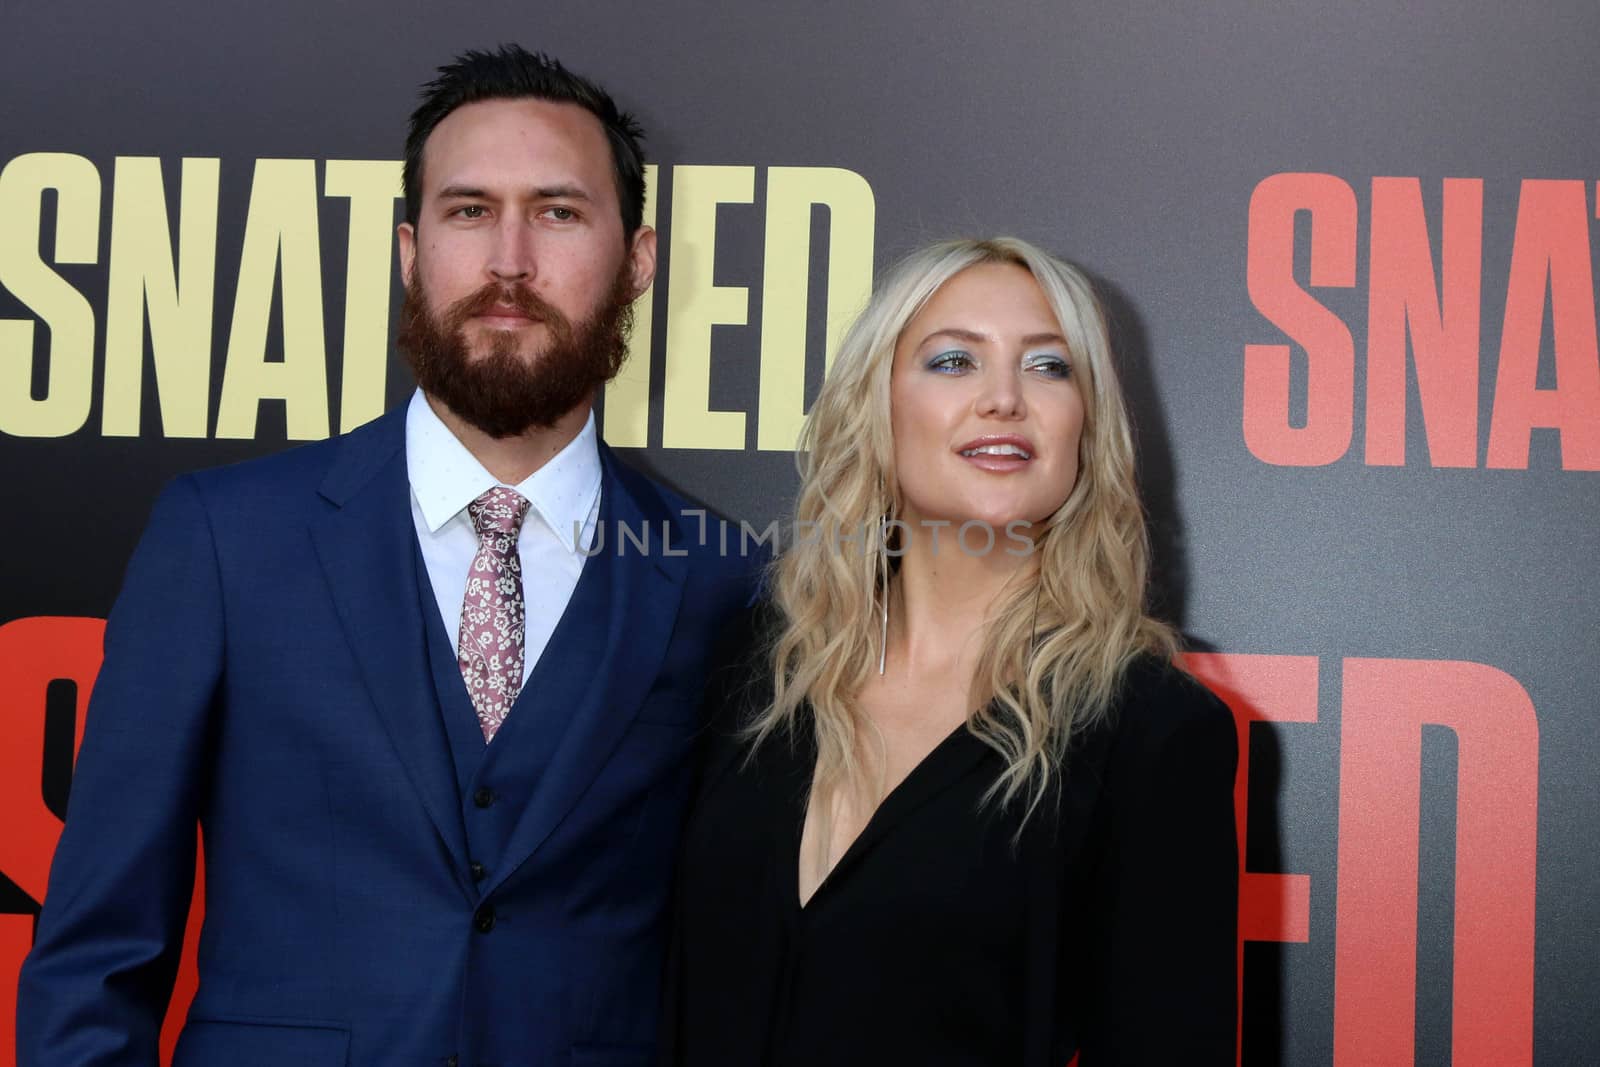 Danny Fujikawa, Kate Hudson at the "Snatched" World Premiere, Village Theater, Westwood, CA 05-10-17/ImageCollect by ImageCollect